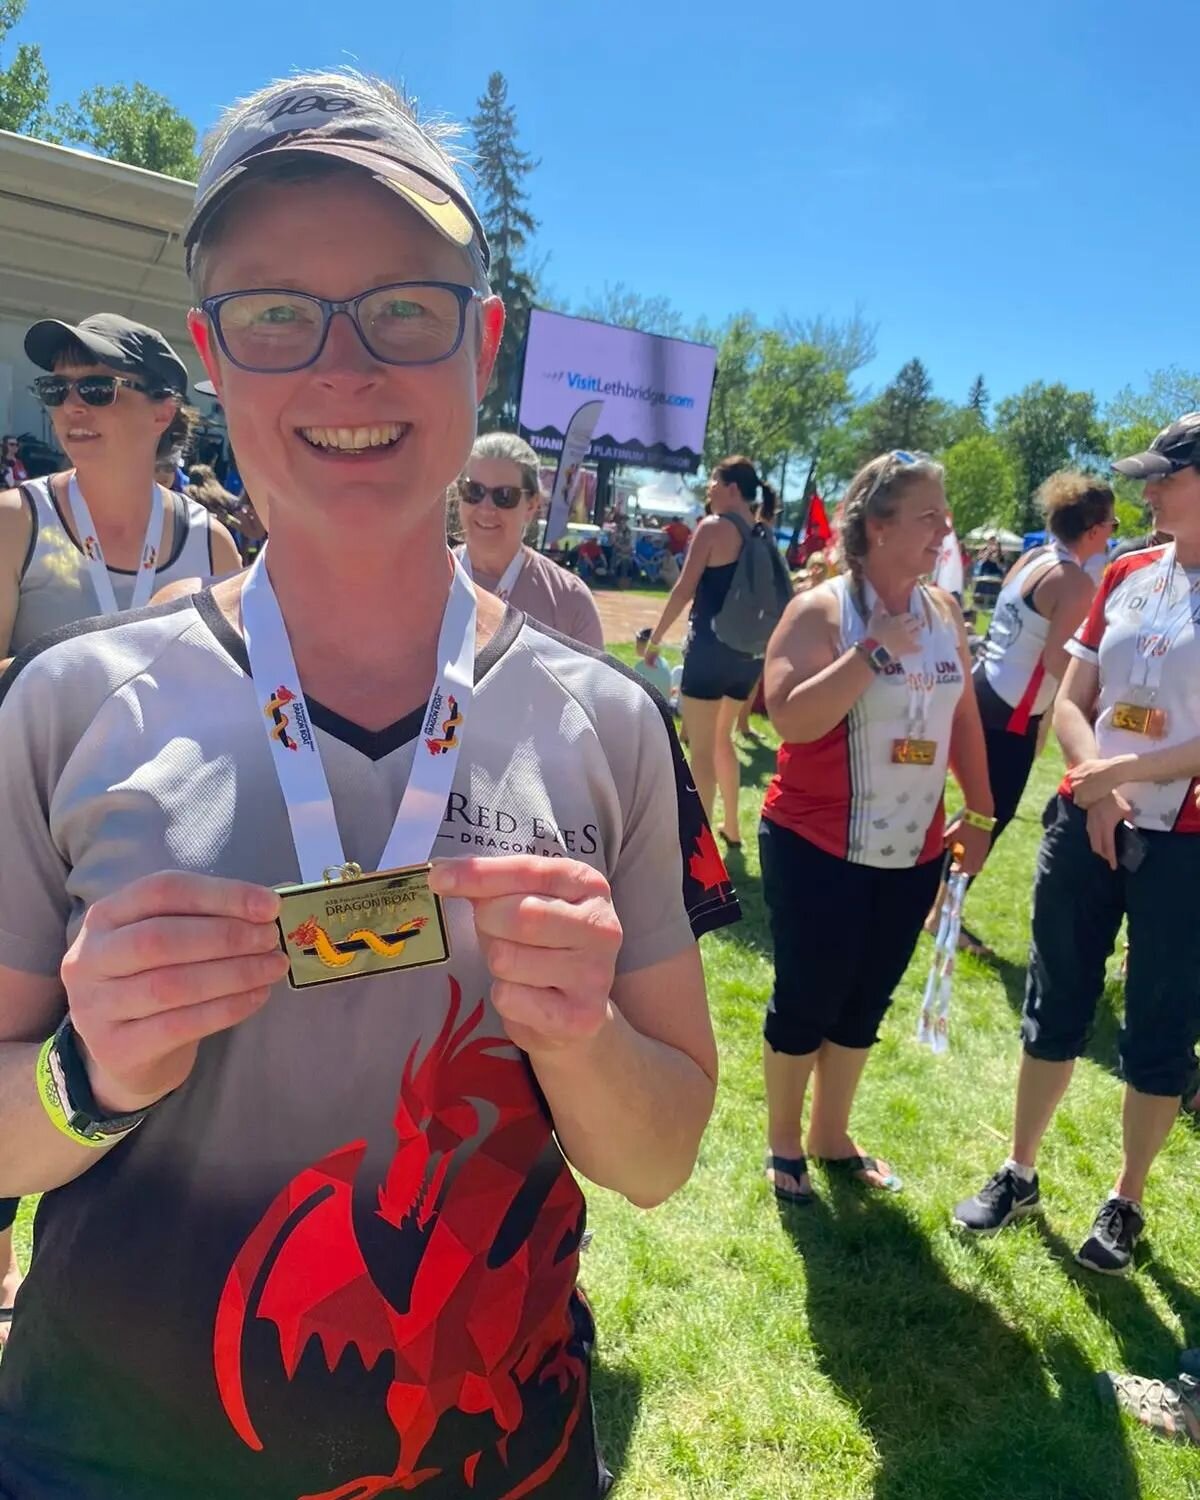 All shiny smiles here with Red Tomatoes, @dragnum_dragonboat !
.
.
#lethdragonfest22 #lethdragonfest #yycdbs #paddlesupyyc #redeyesdragonboat #redtomatoes #dragnumdragonboat